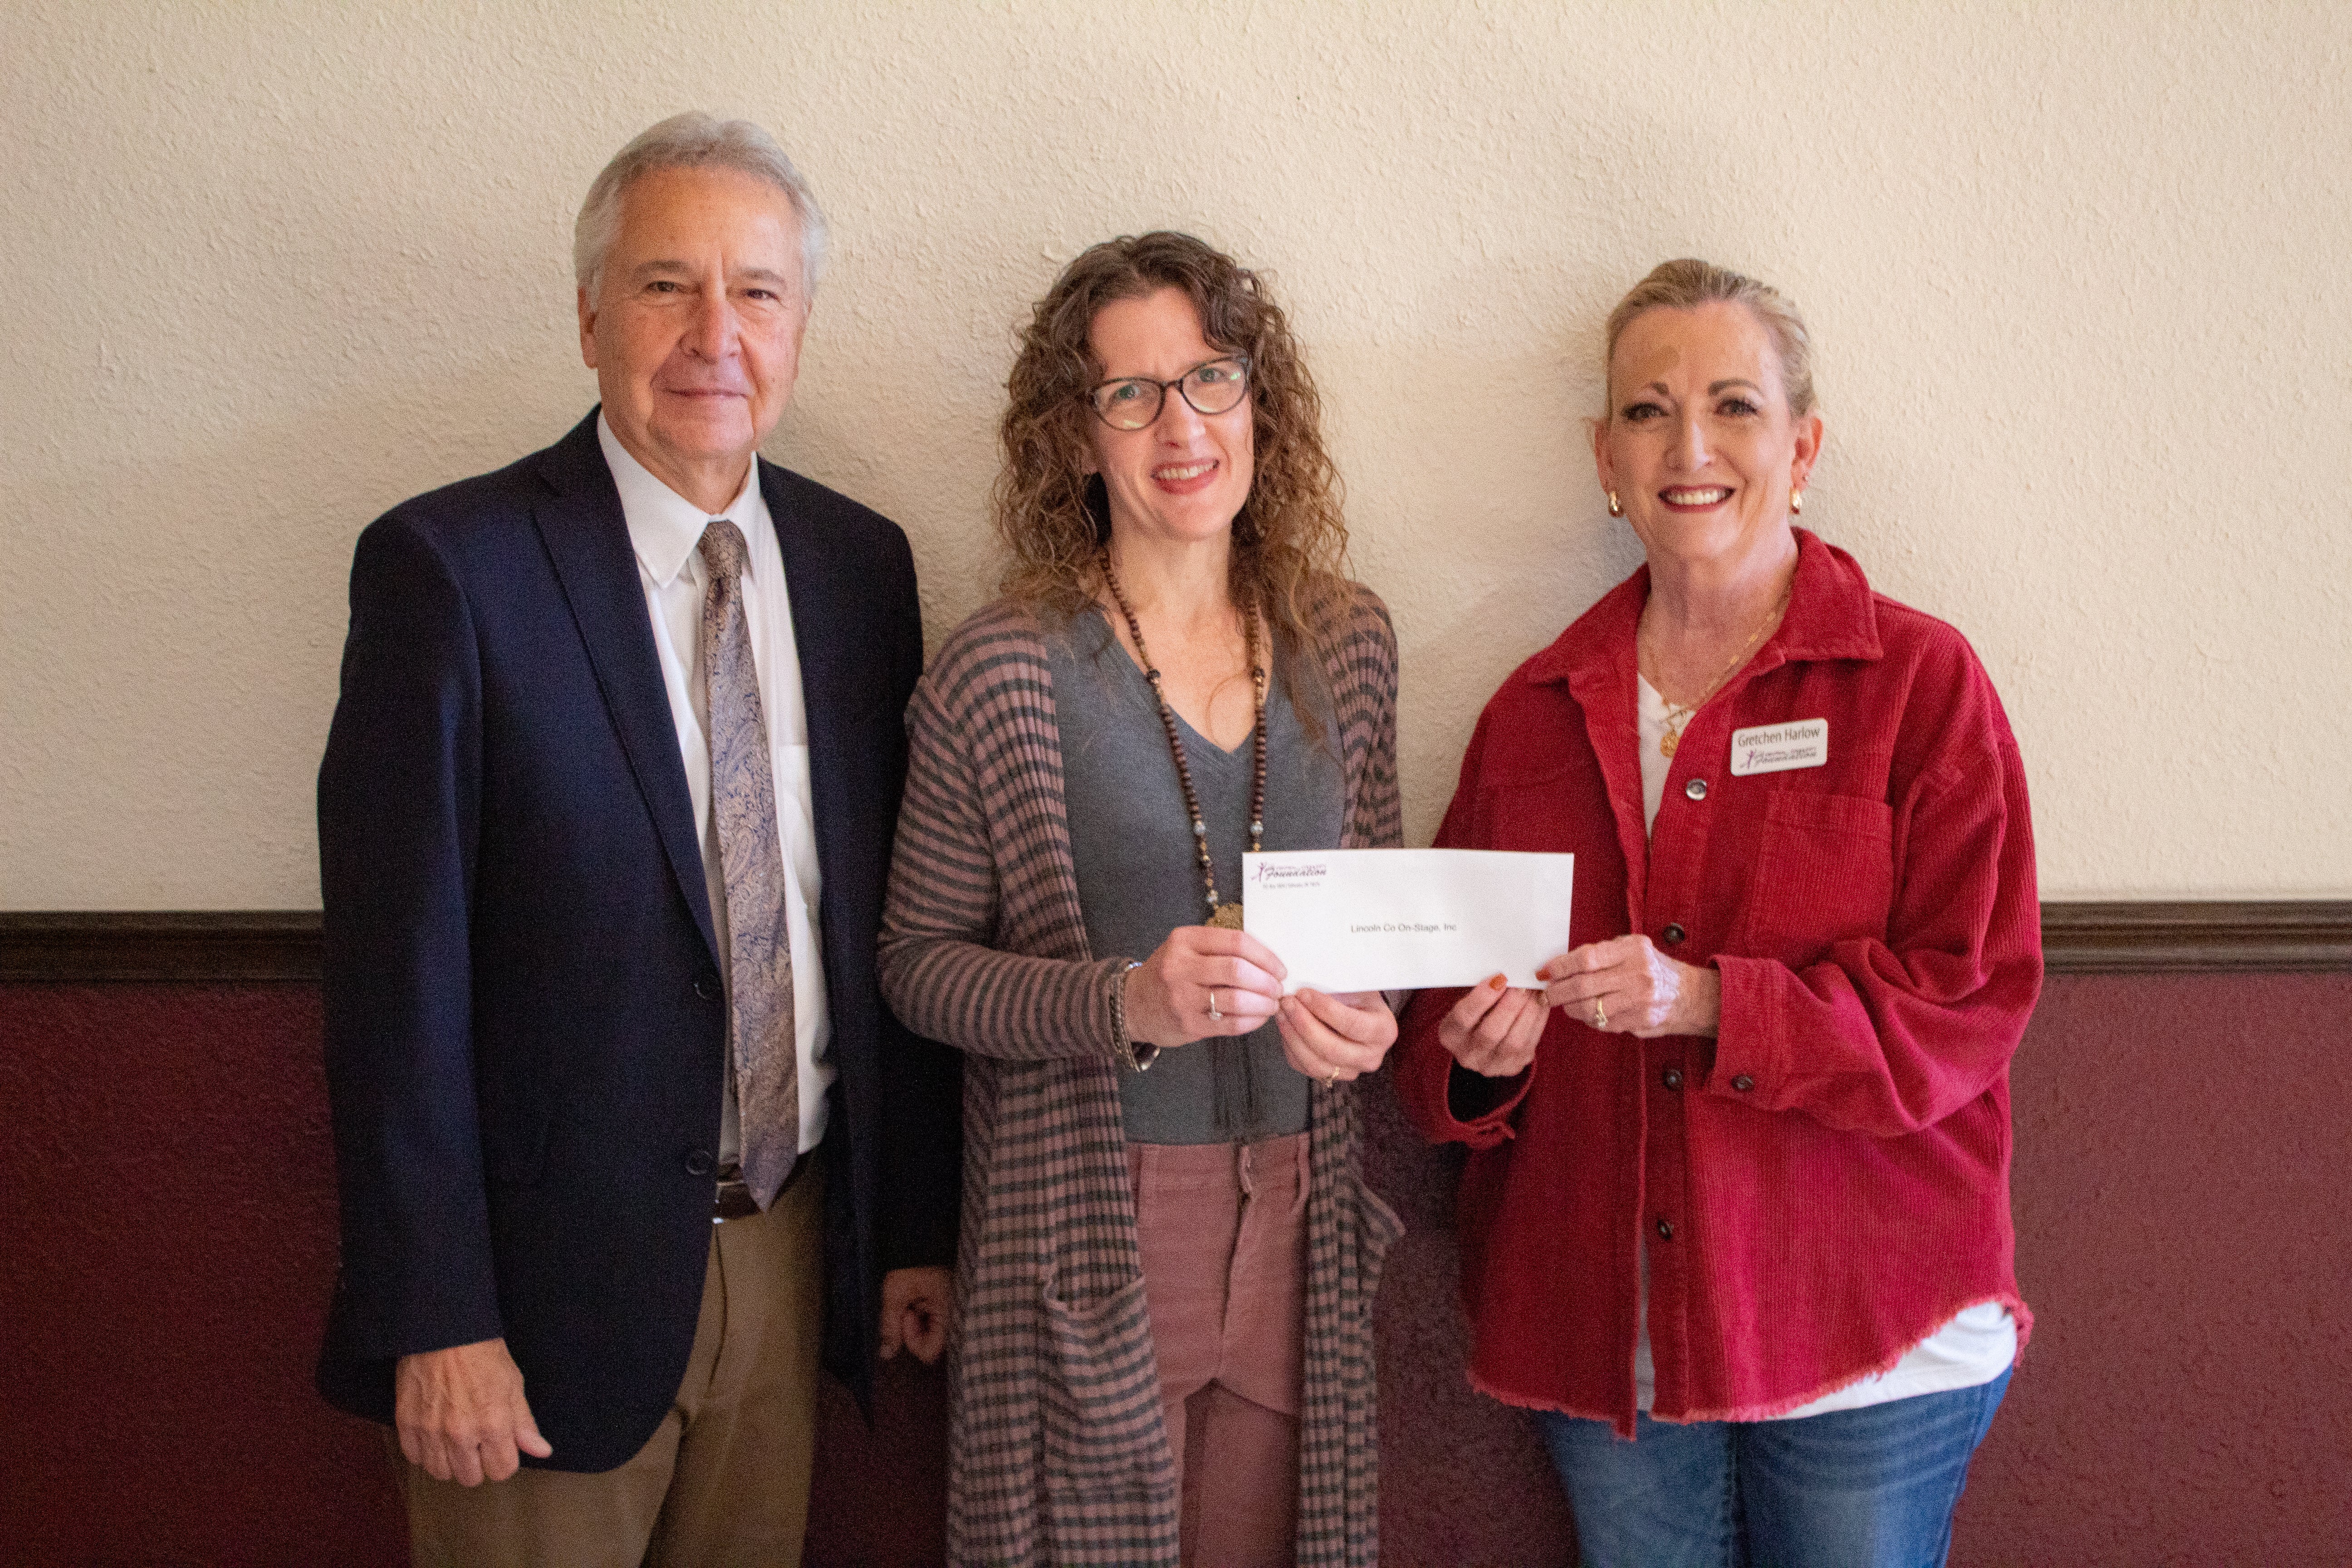 On Stage’s Larry Lenora and Mandy Myers is presented a grant by Central Community Foundation Board Member Gretchen.